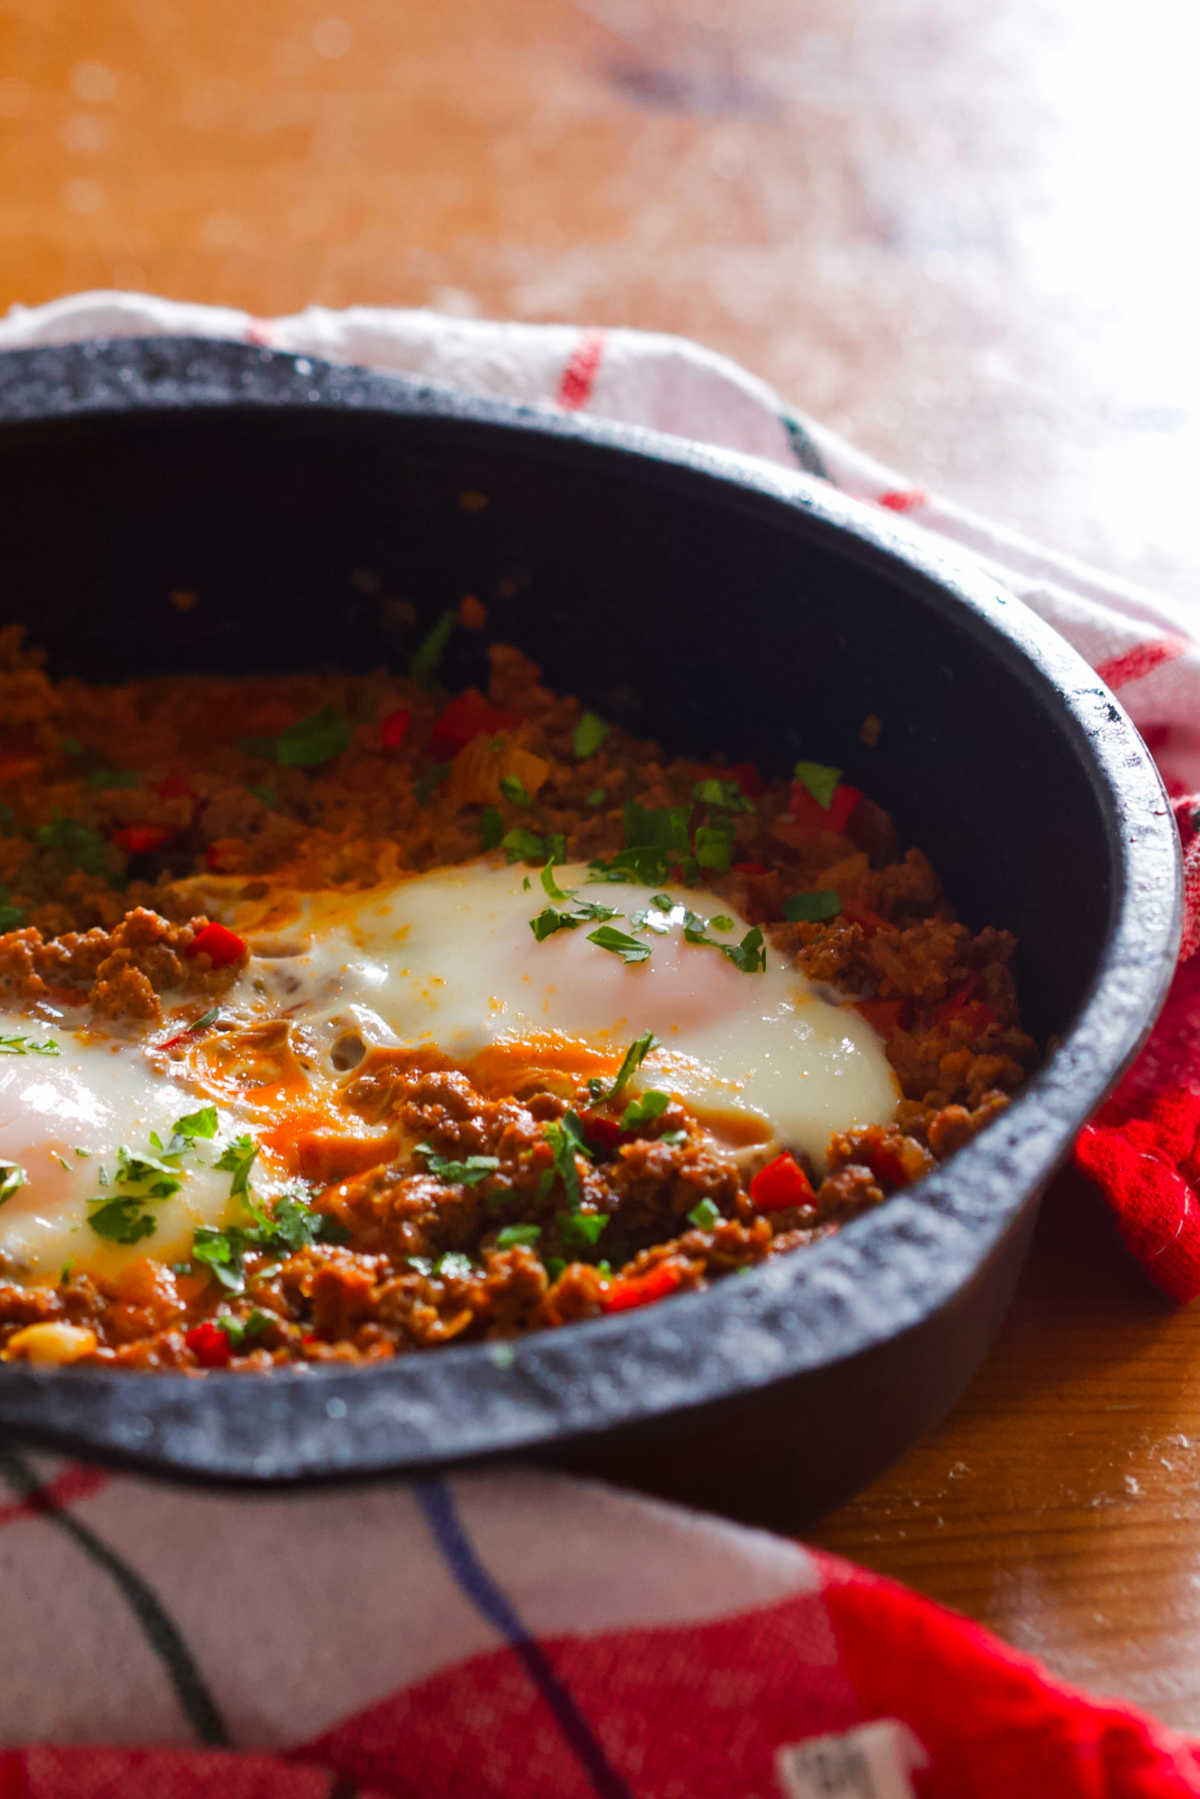 Black pan with two eggs and ground beef around which is a kitchen towel, all on a wooden table.